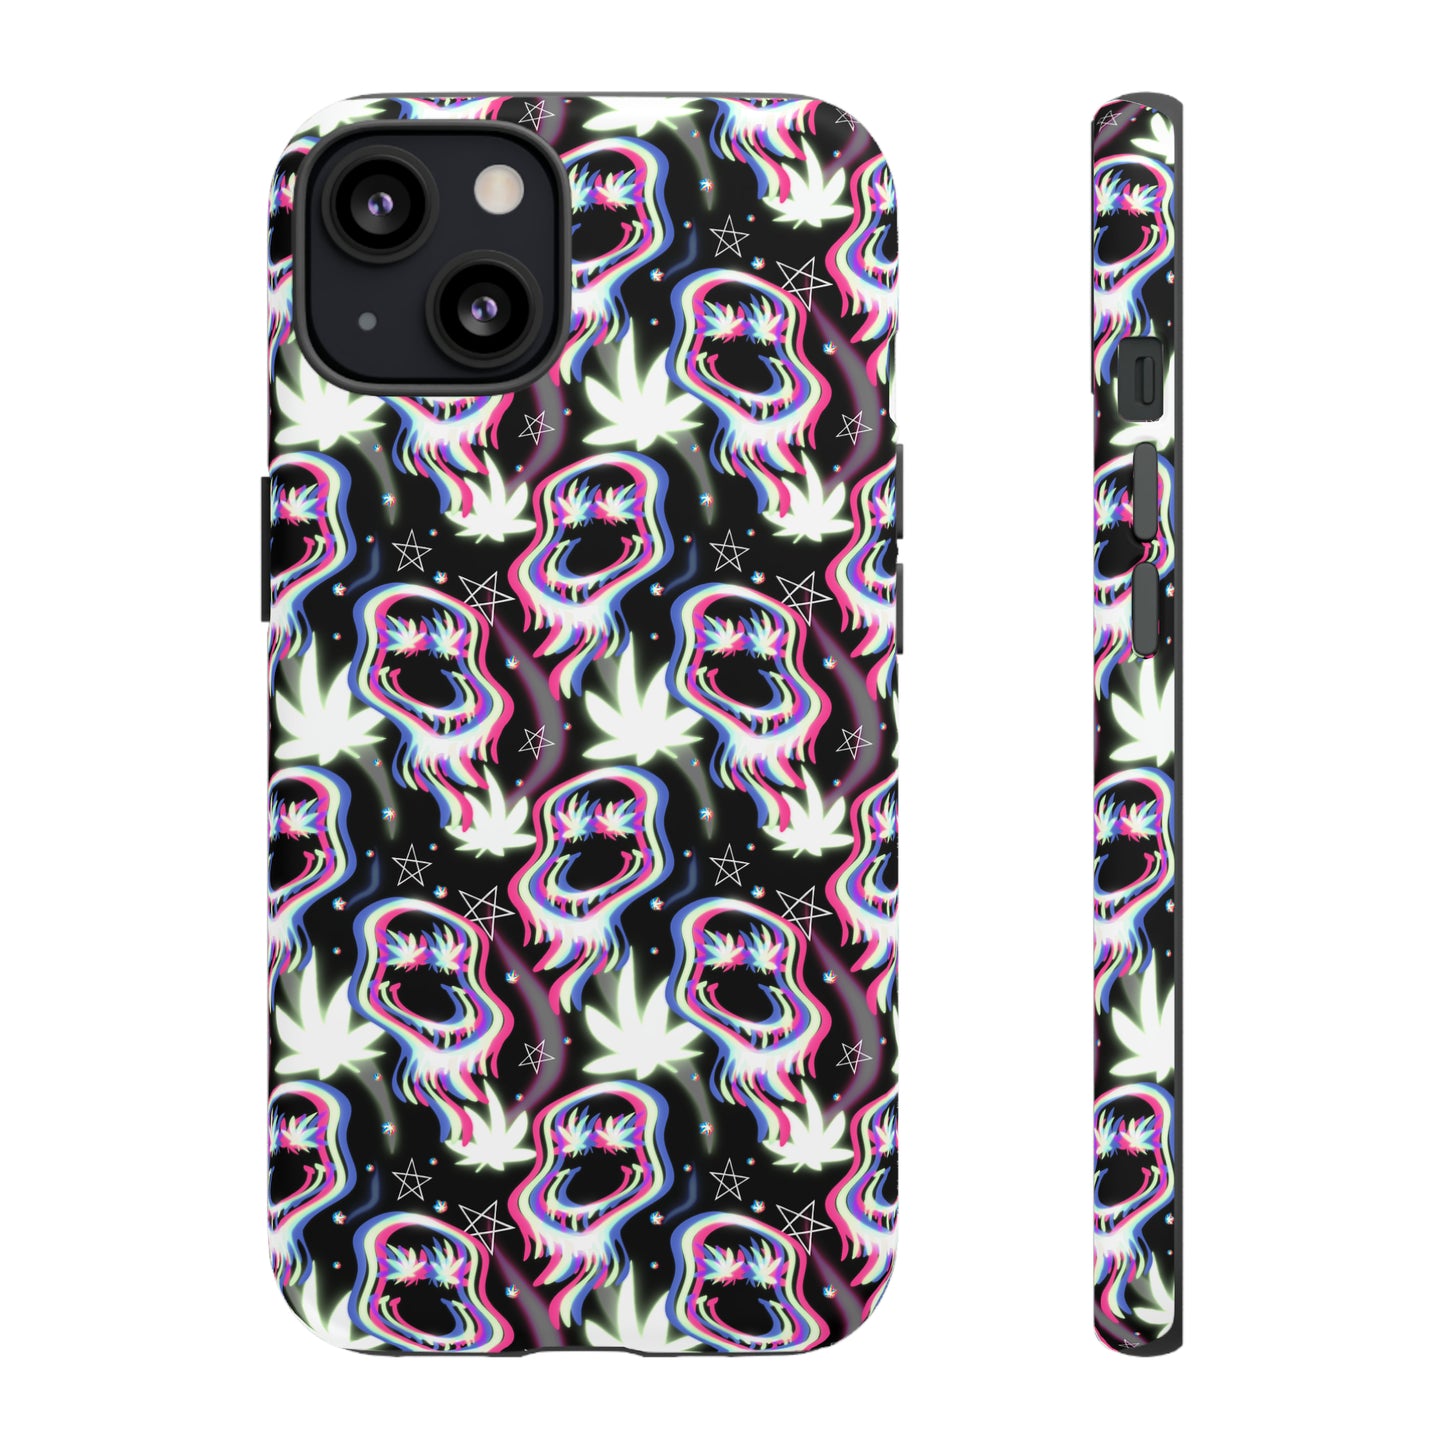 420 smiley Tough Phone Case for Iphones, Samsungs, and Google phones